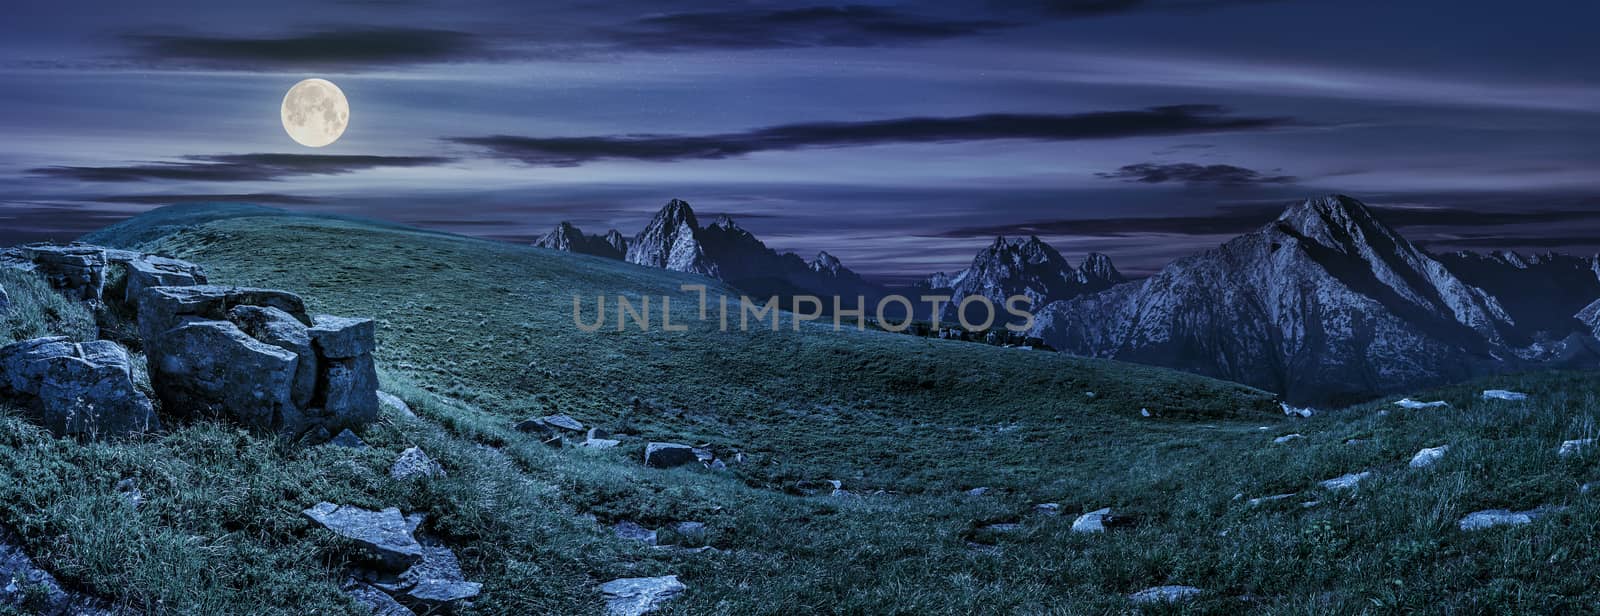 Hight Tatra mountain summer landscape. meadow with huge stones among the grass on top of the hillside near the peak of mountain range at night in full moon light